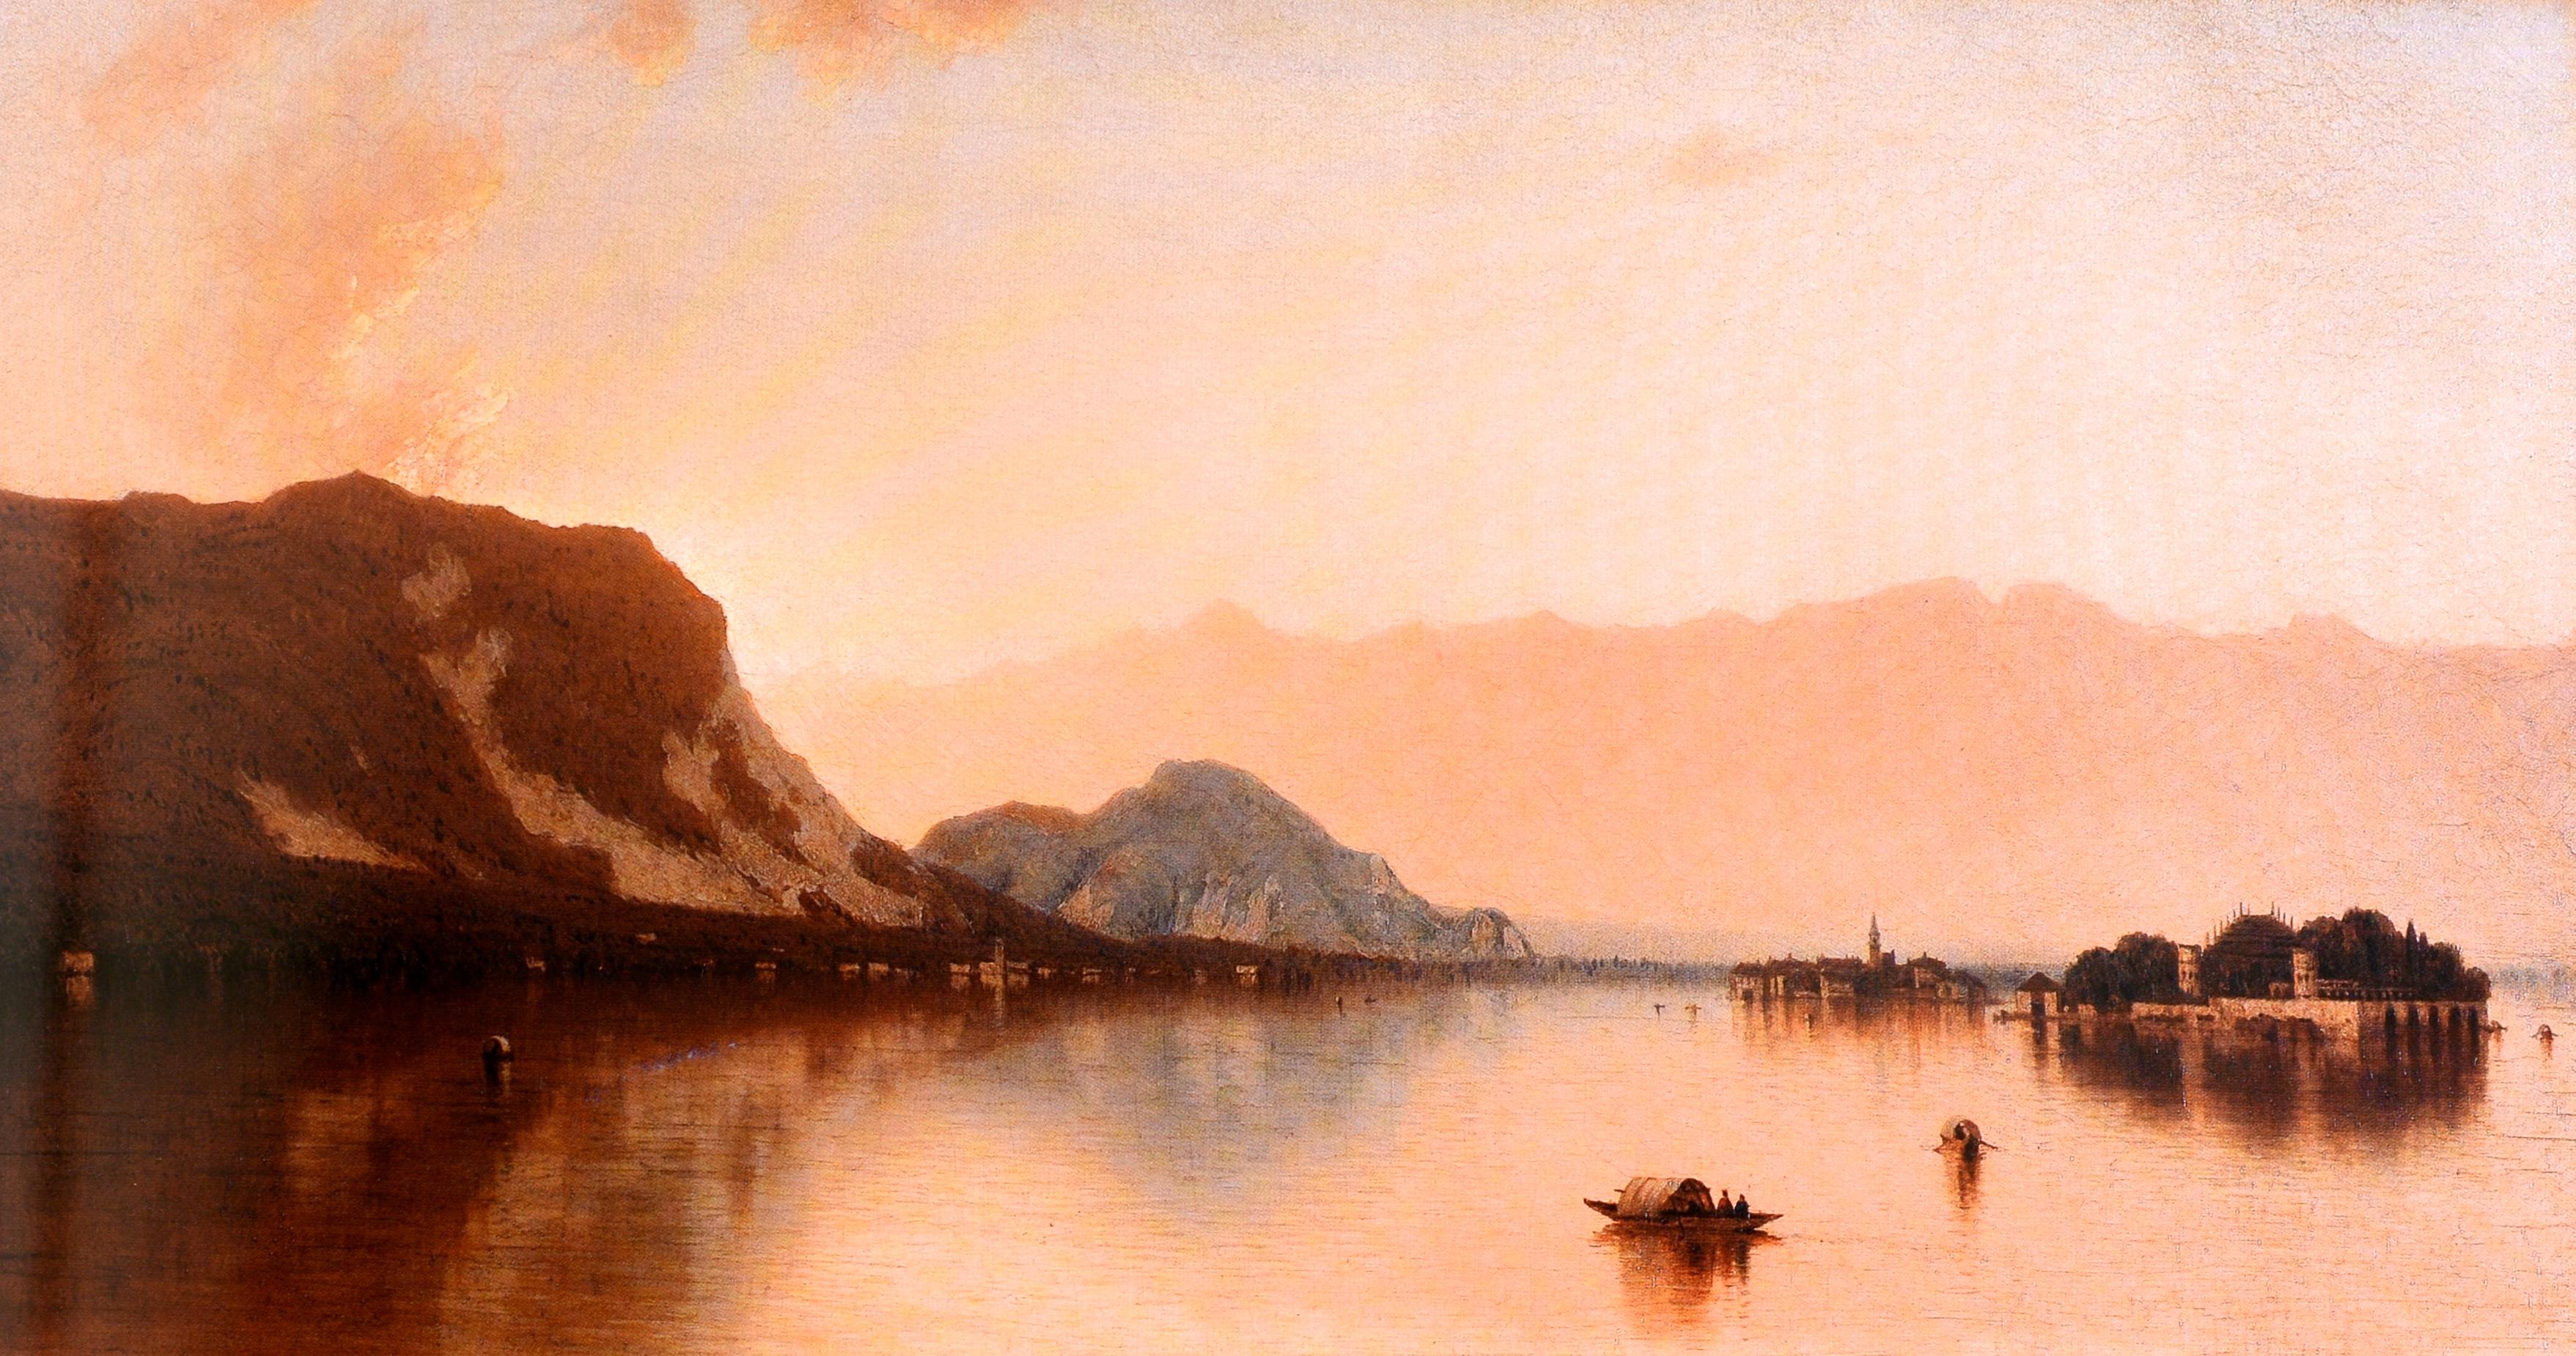 Hudson River School Visions The Landscapes of Sanford R. Gifford by Kevin Avery 5